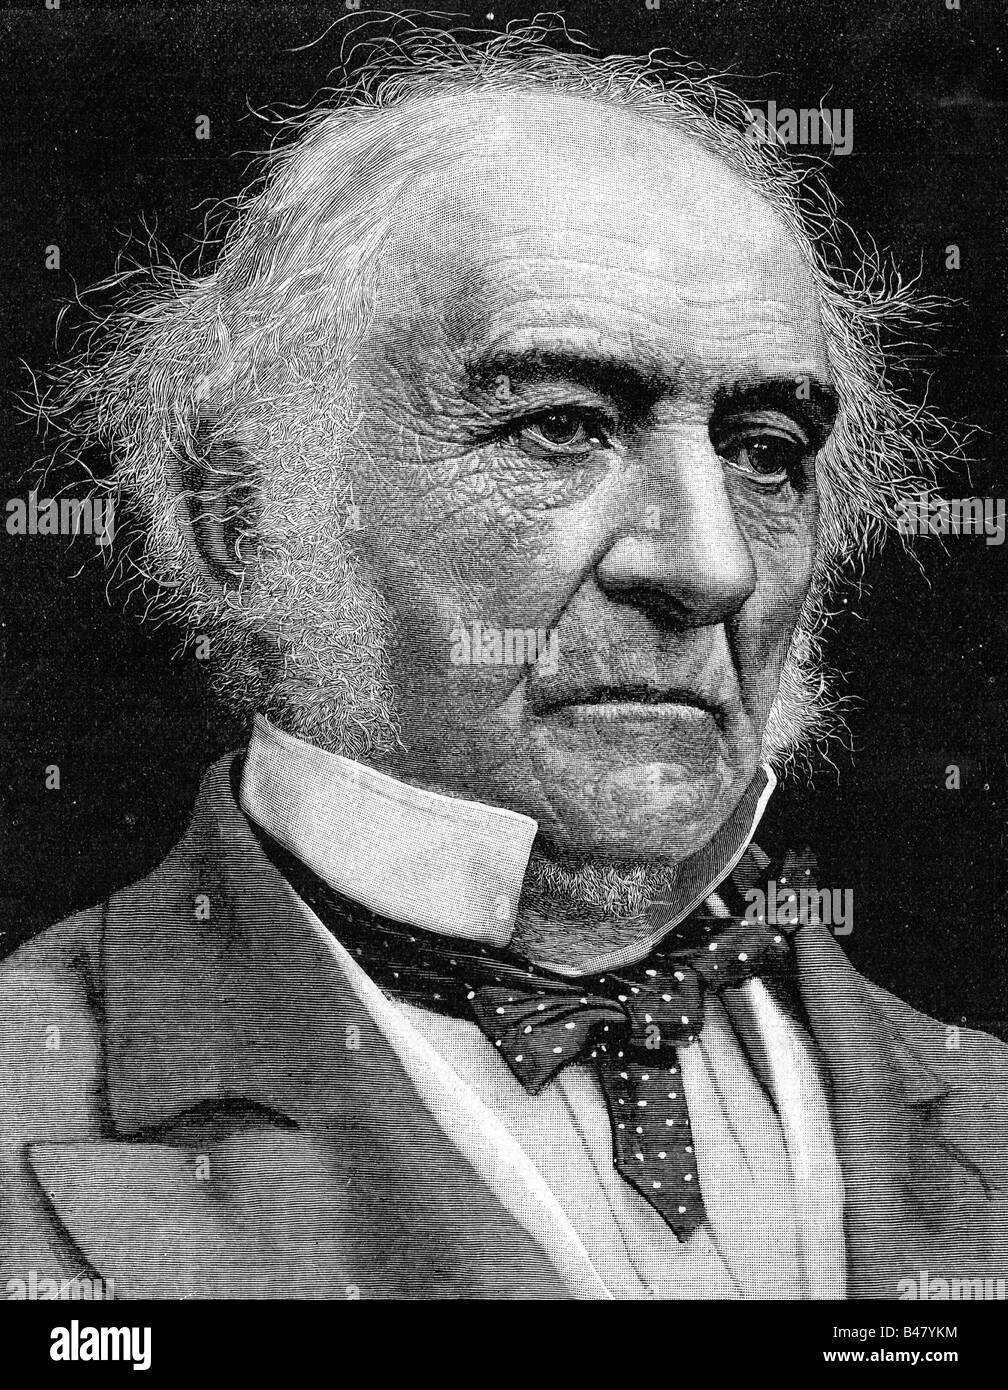 Gladstone, William Ewart, 29.12.1809 - 19.5.1898, British politcian, British Liberal Party, portrait, xylography after photo by S.A. Walker, 19th century, Stock Photo